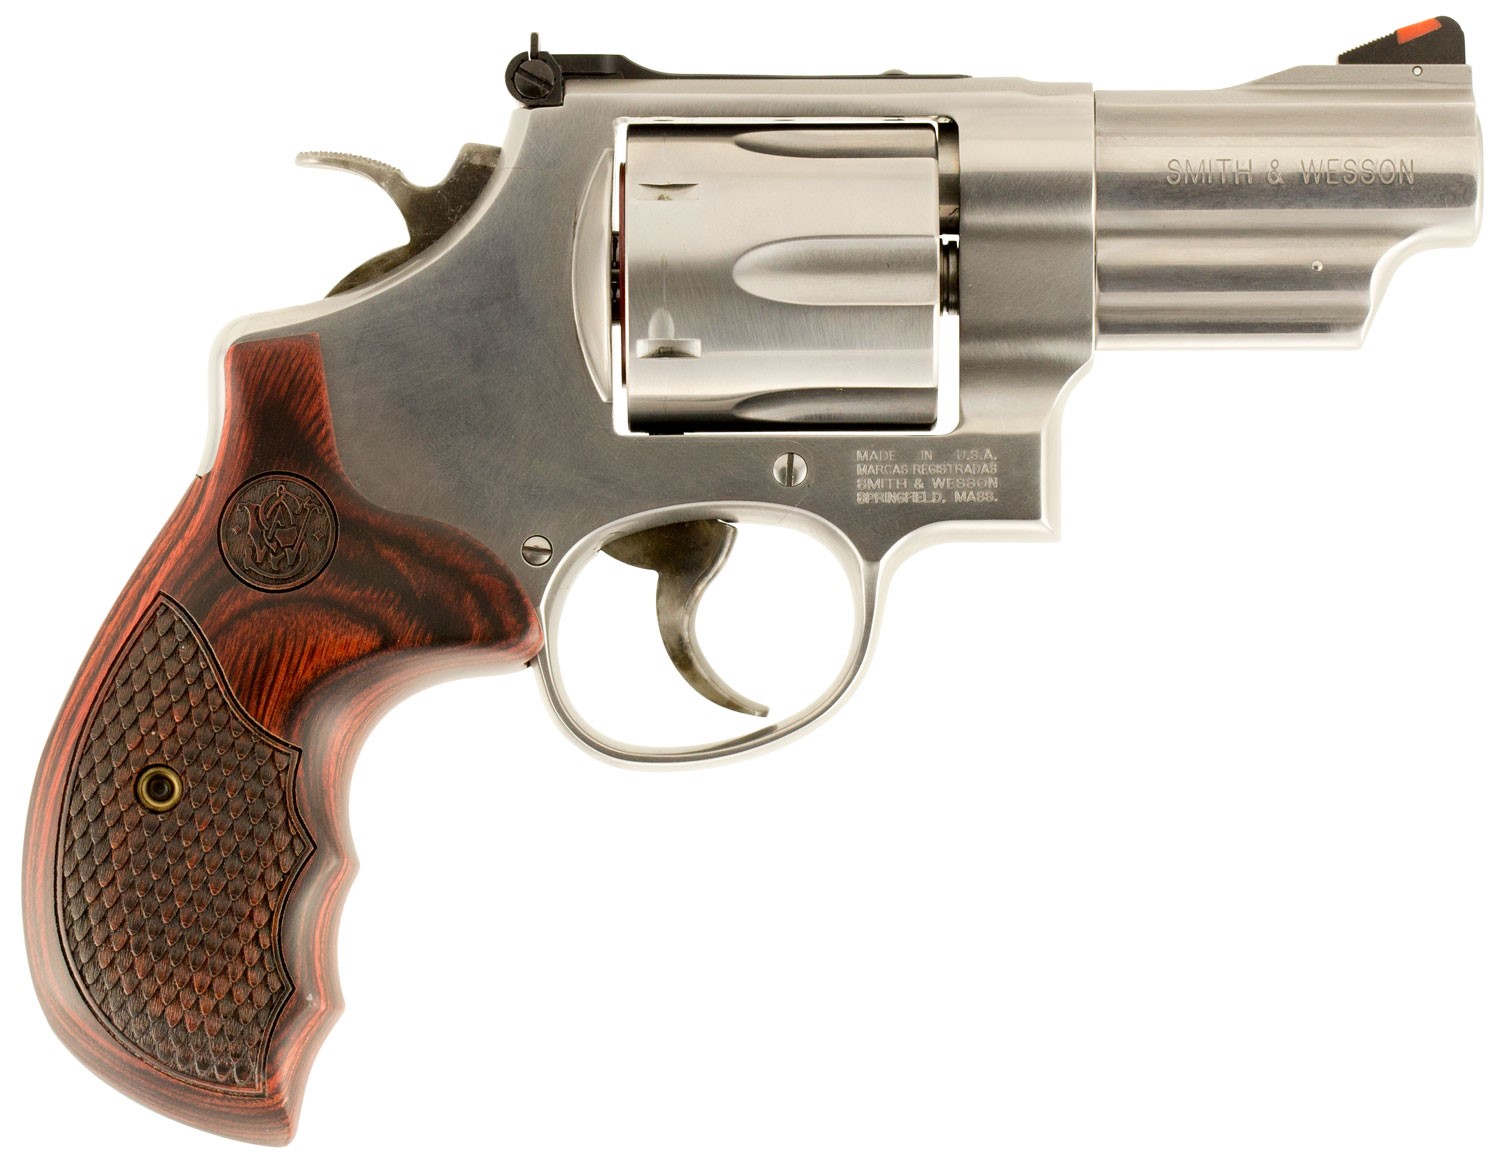 SMITH AND WESSON 629, 44MAG 3" S/S ,6RDS ,WOOD GRIP